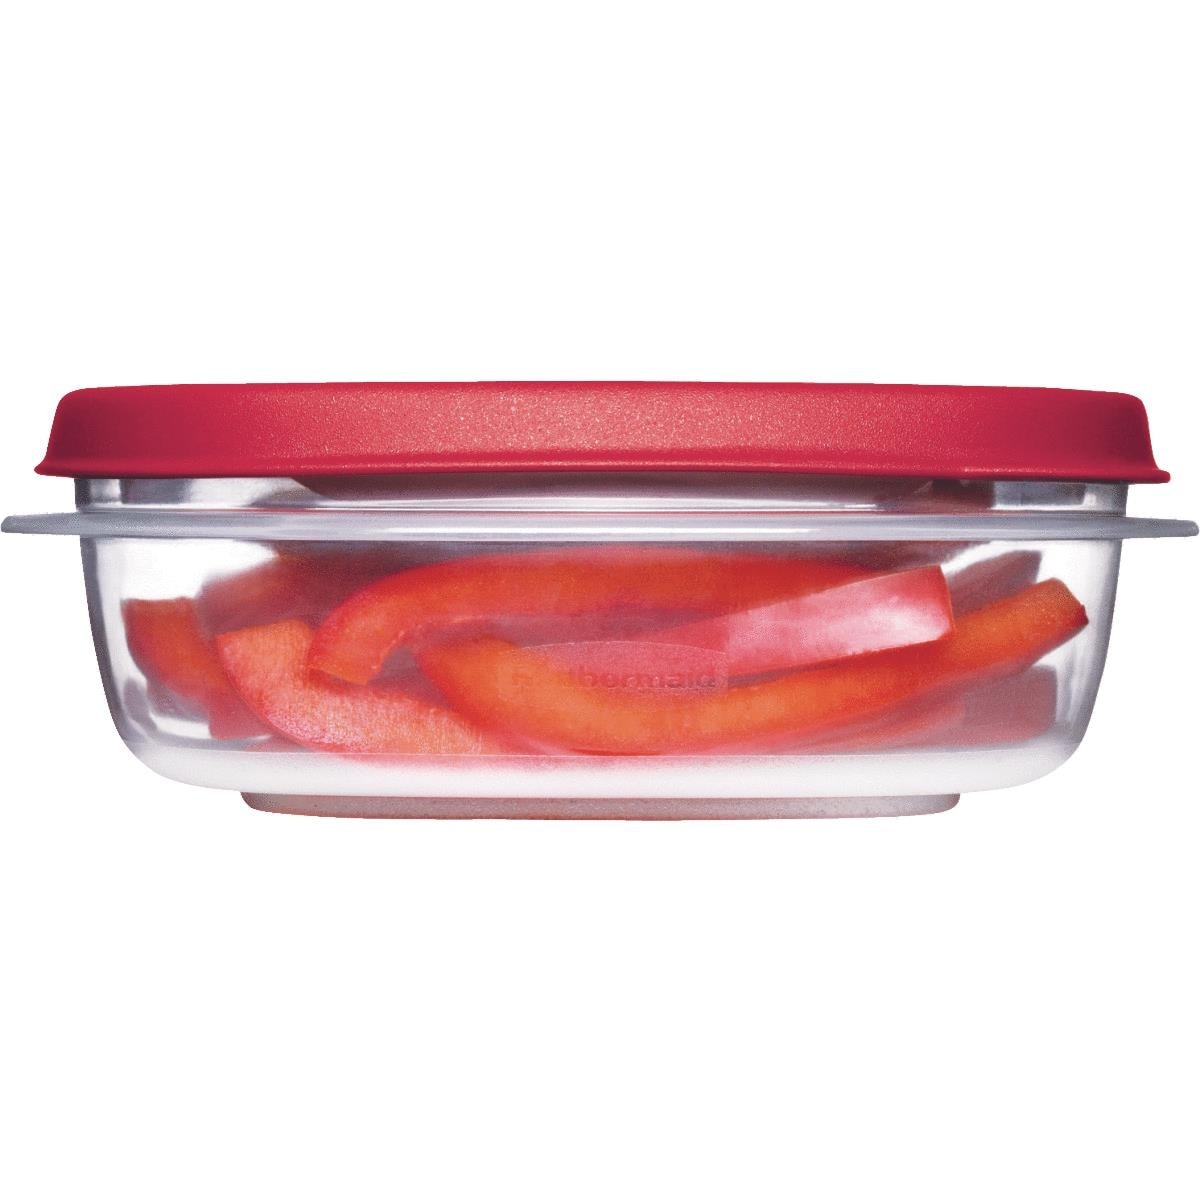  Rubbermaid Easy Find Lids Food Storage Container, 3 Cup, Racer  Red: Food Savers: Home & Kitchen